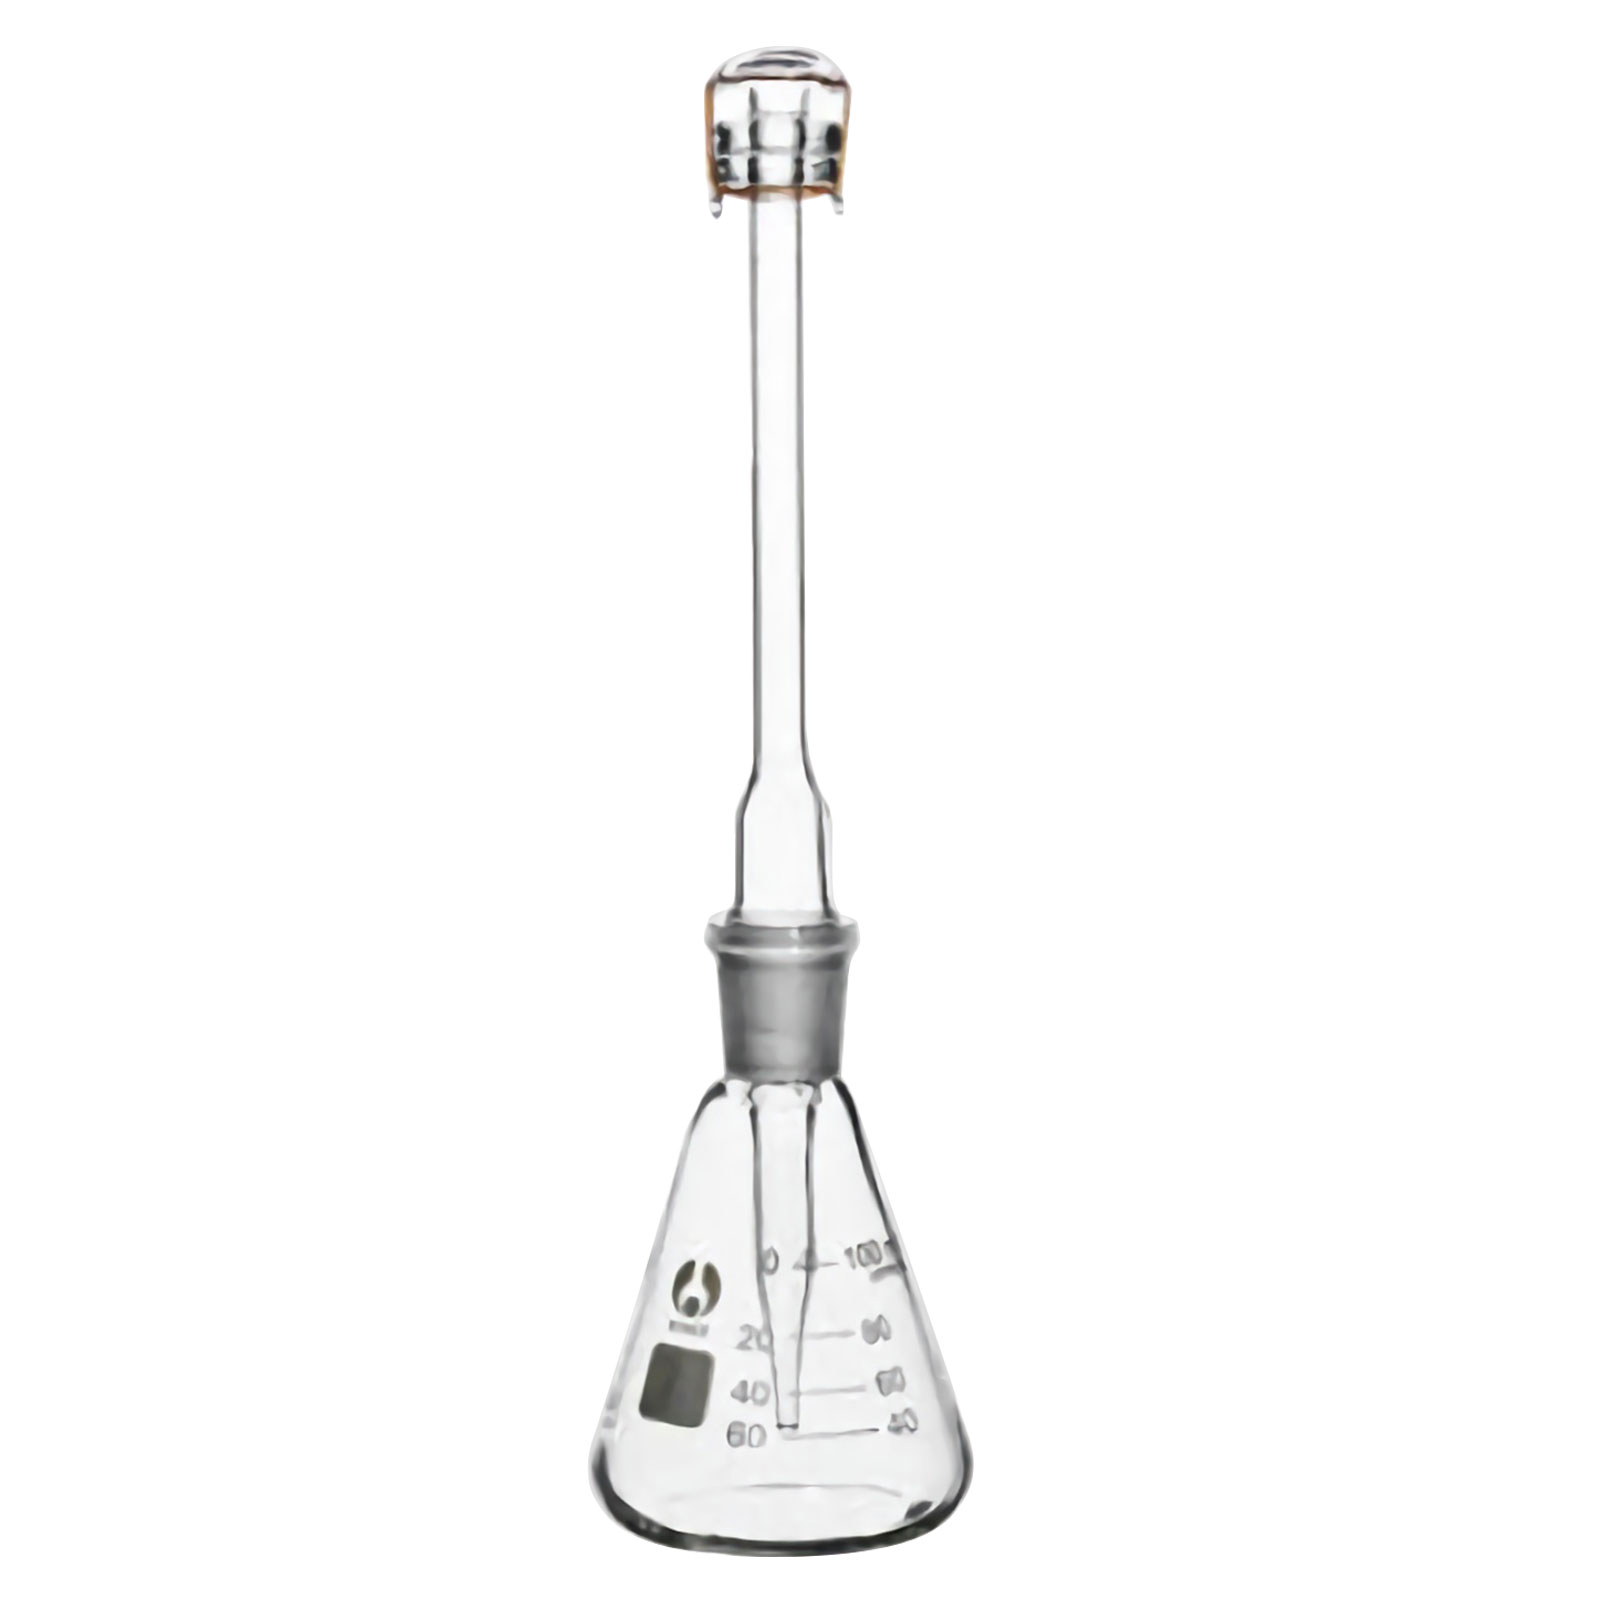 ADAMAS-BETA Gucai Arsenic Detector 100ml/150ml Conical Flask+Pointed Nose Glass Tube Set Laboratory Silver Salt Arsenic Measuring Instruments